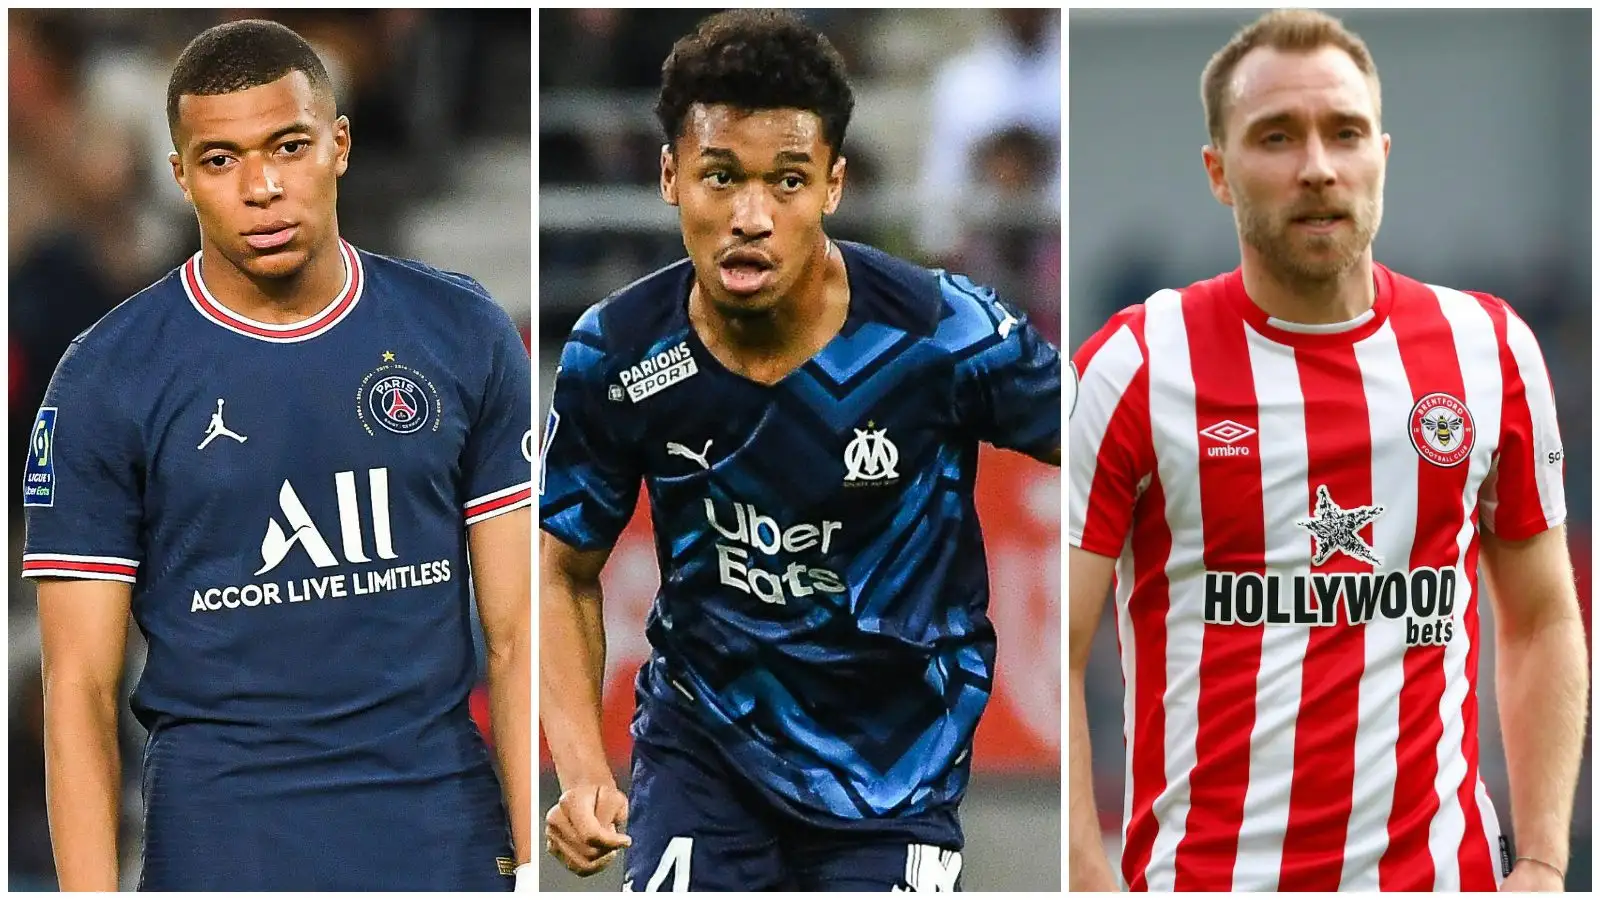 Kylian Mbappe, Boubacar Kamara and Christian Eriksen are all out of contract this summer.